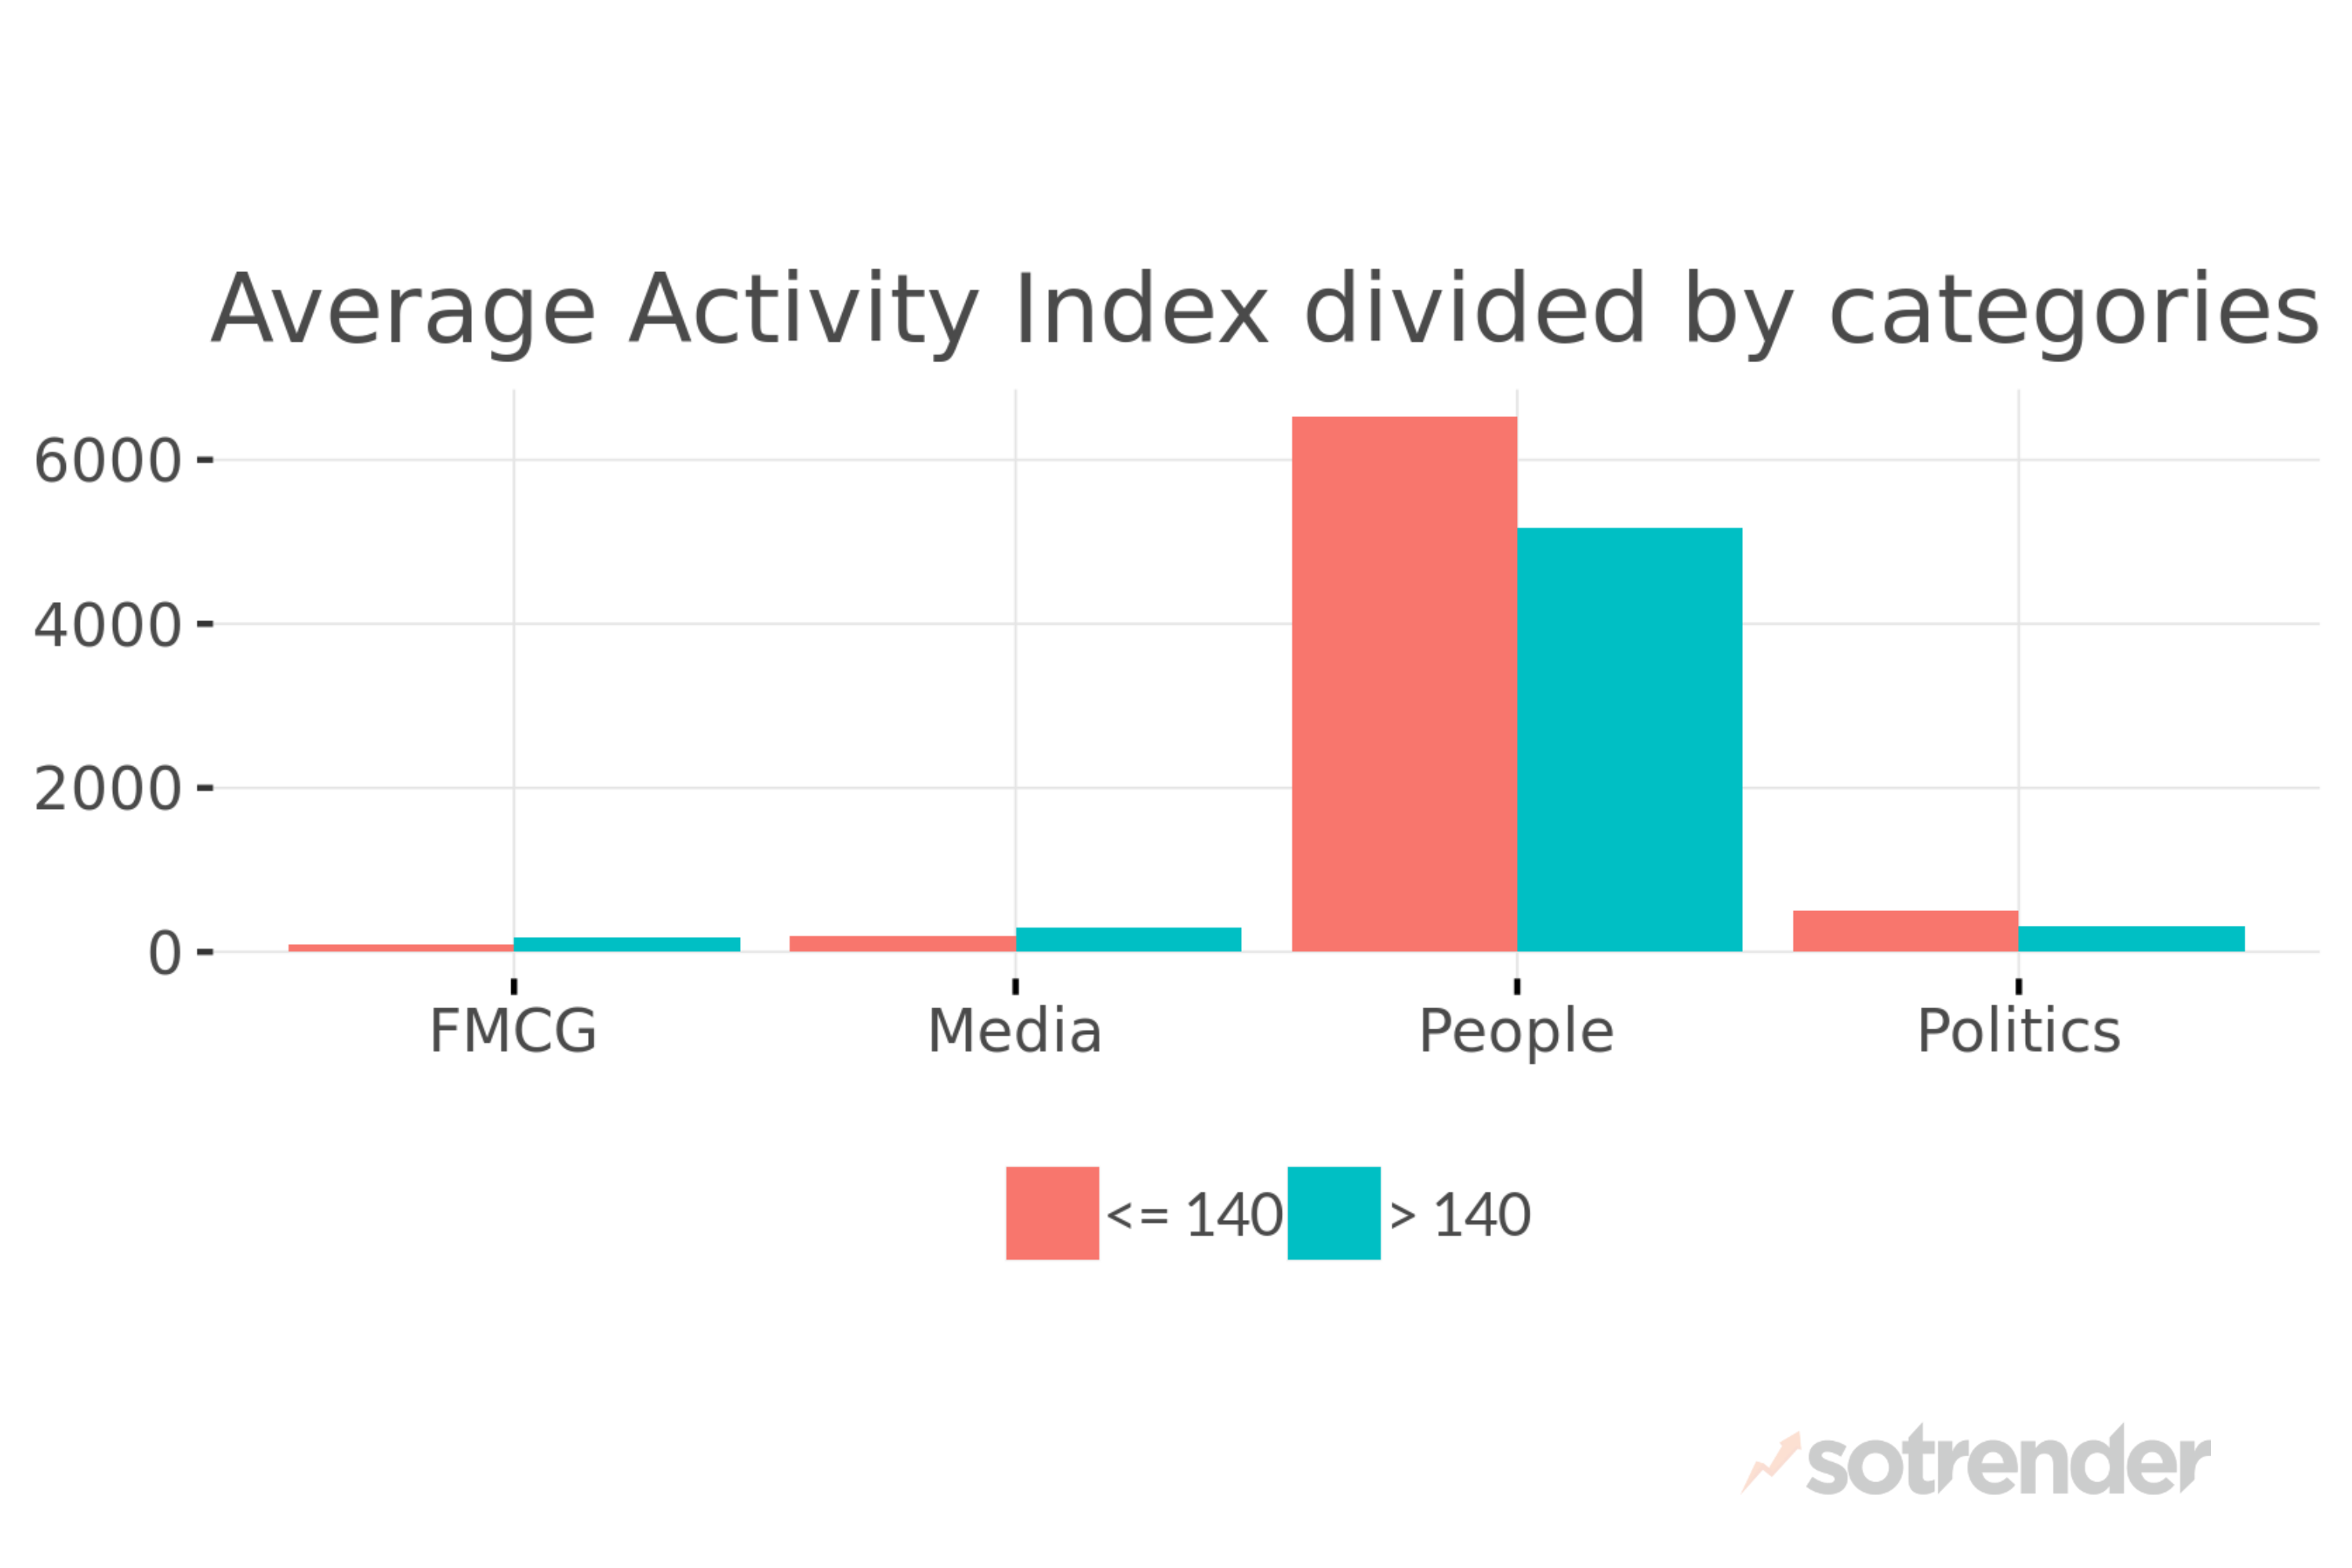 Average Activity Index on Twitter in selected categories